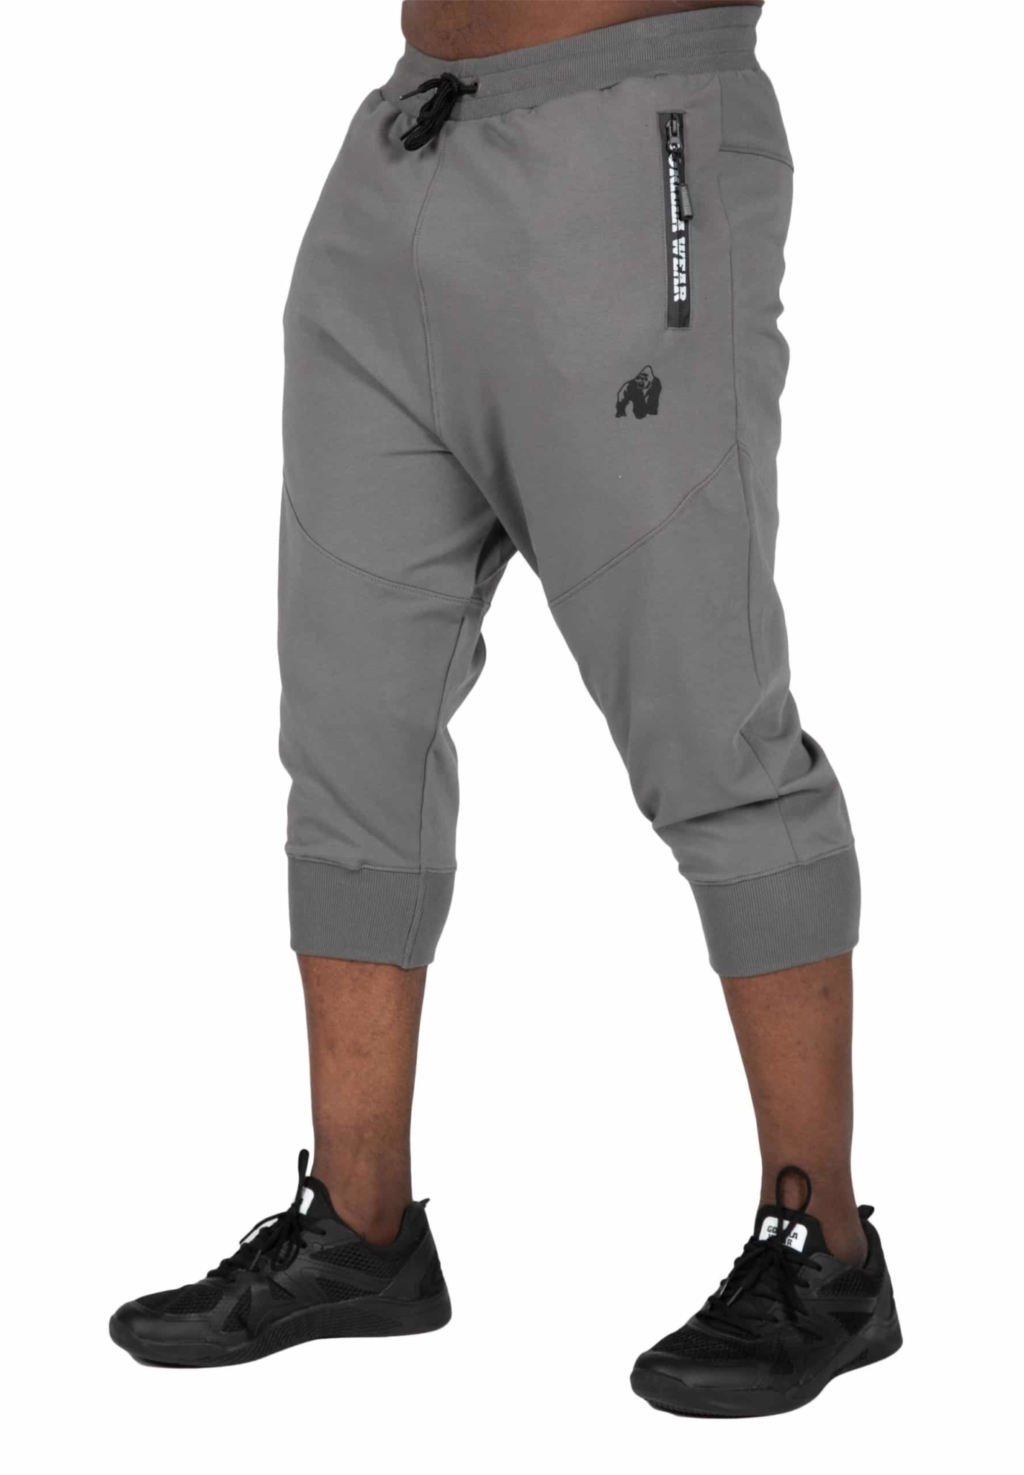 90966800 knoxville 3 4 sweatpants gray 6 1 scaled scaled